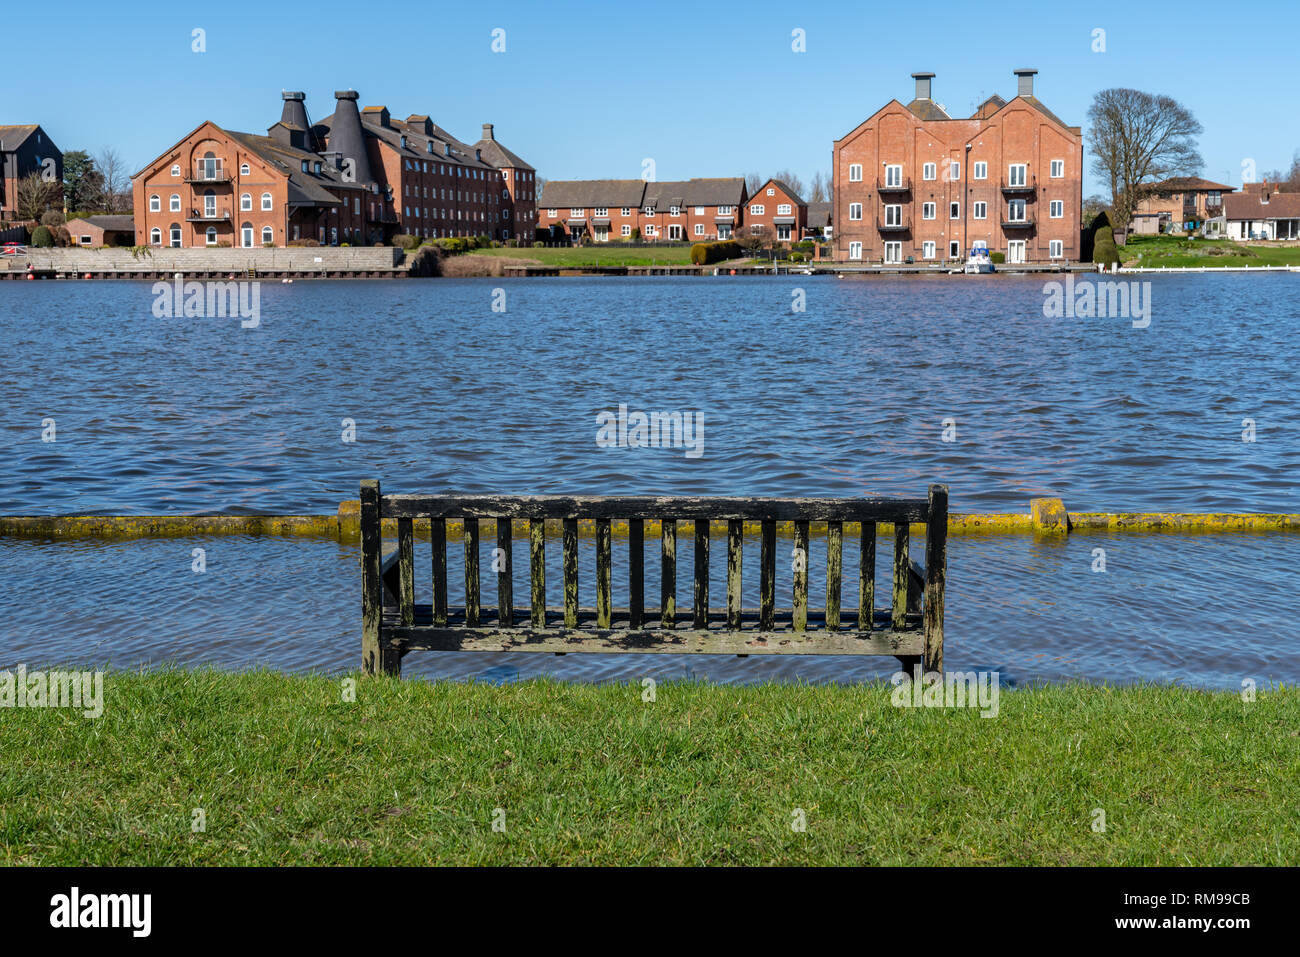 Oulton Broad, Suffolk, England, UK - April 05, 2018: Flooded bench on the shore of the Oulton Broad Stock Photo